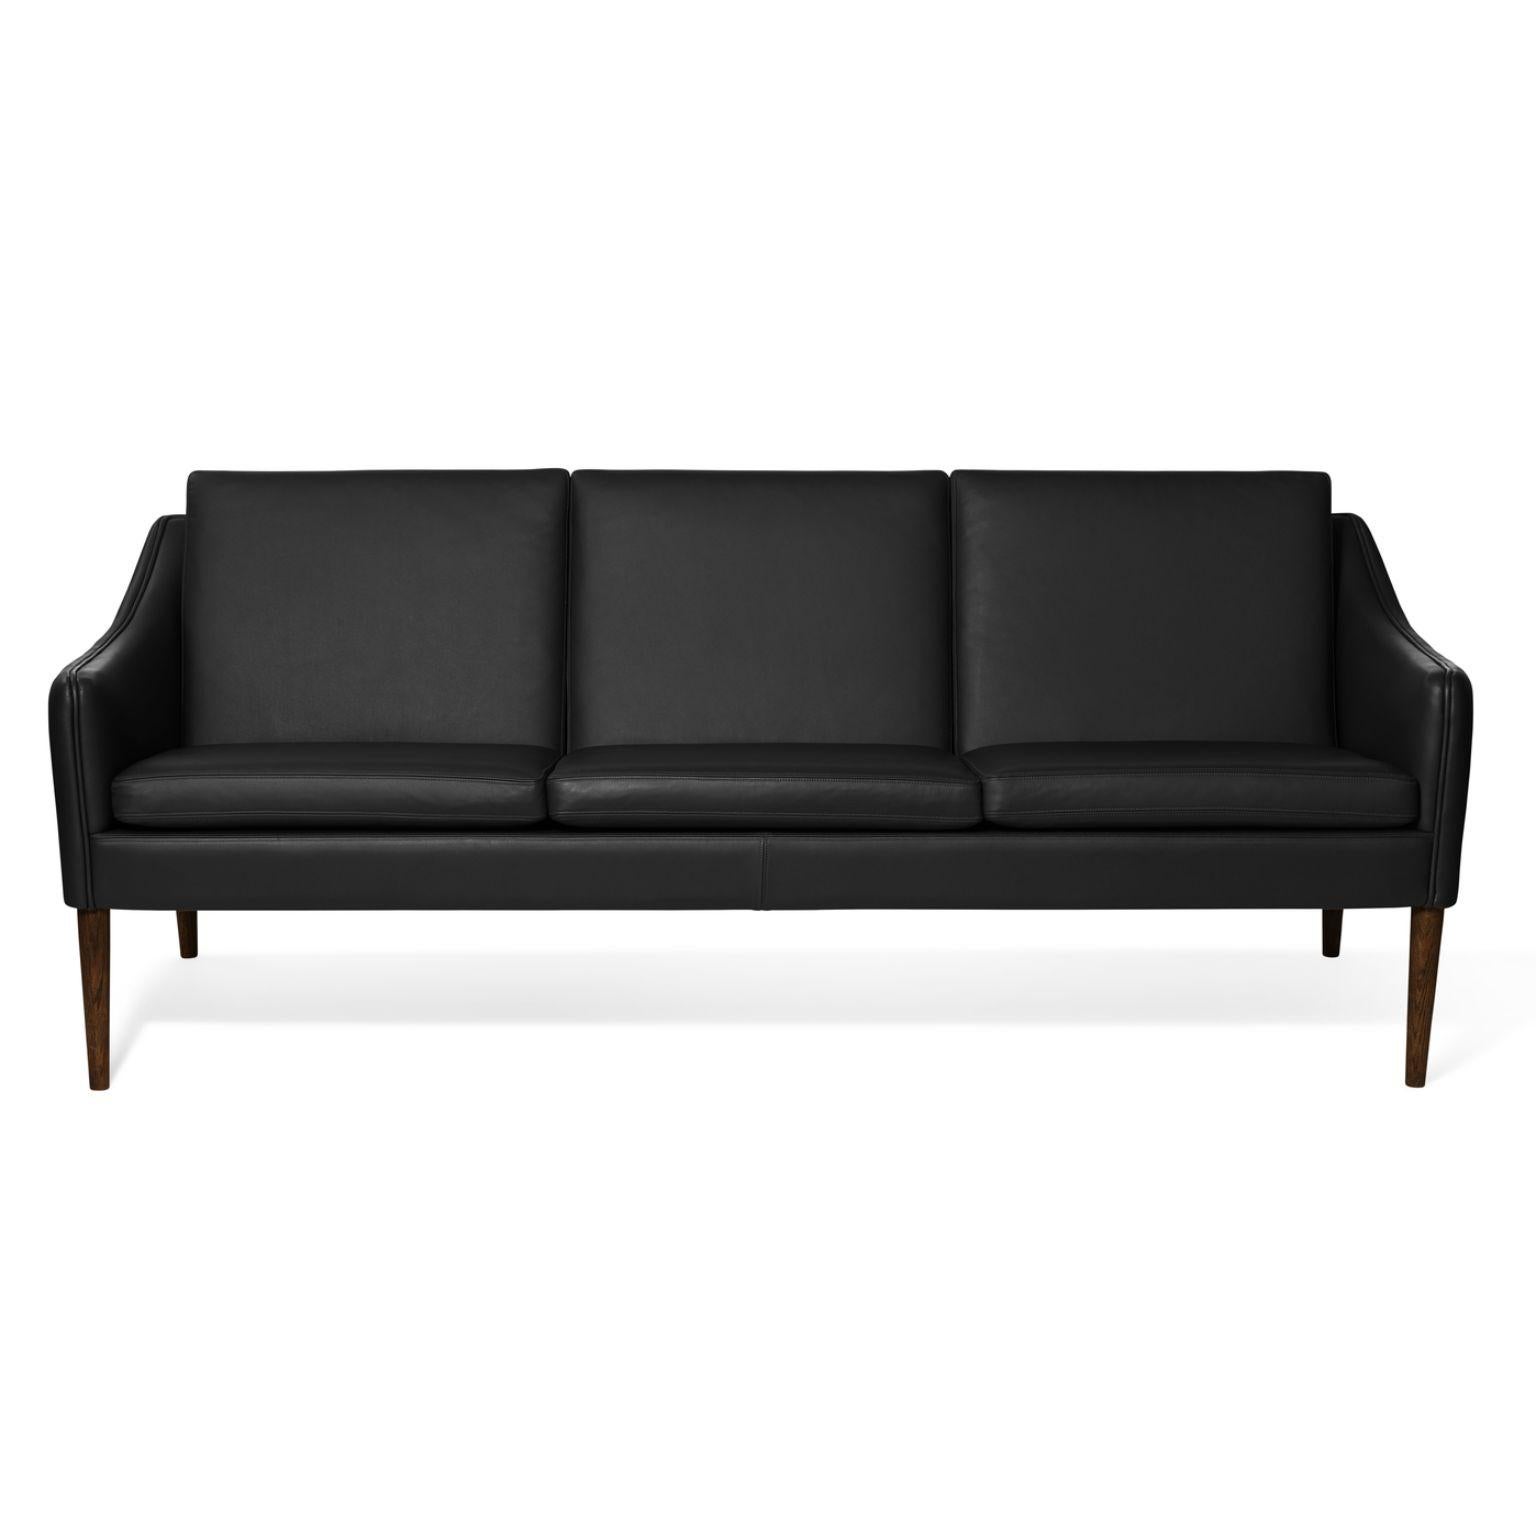 Mr Olsen 3 seater walnut challenger black leather by Warm Nordic
Dimensions: D201 x W79 x H 78/46 cm
Material: Textile upholstery, foam, spring system, solid oiled oak legs, solid smoked oak legs, leather
Weight: 50 kg
Also available in